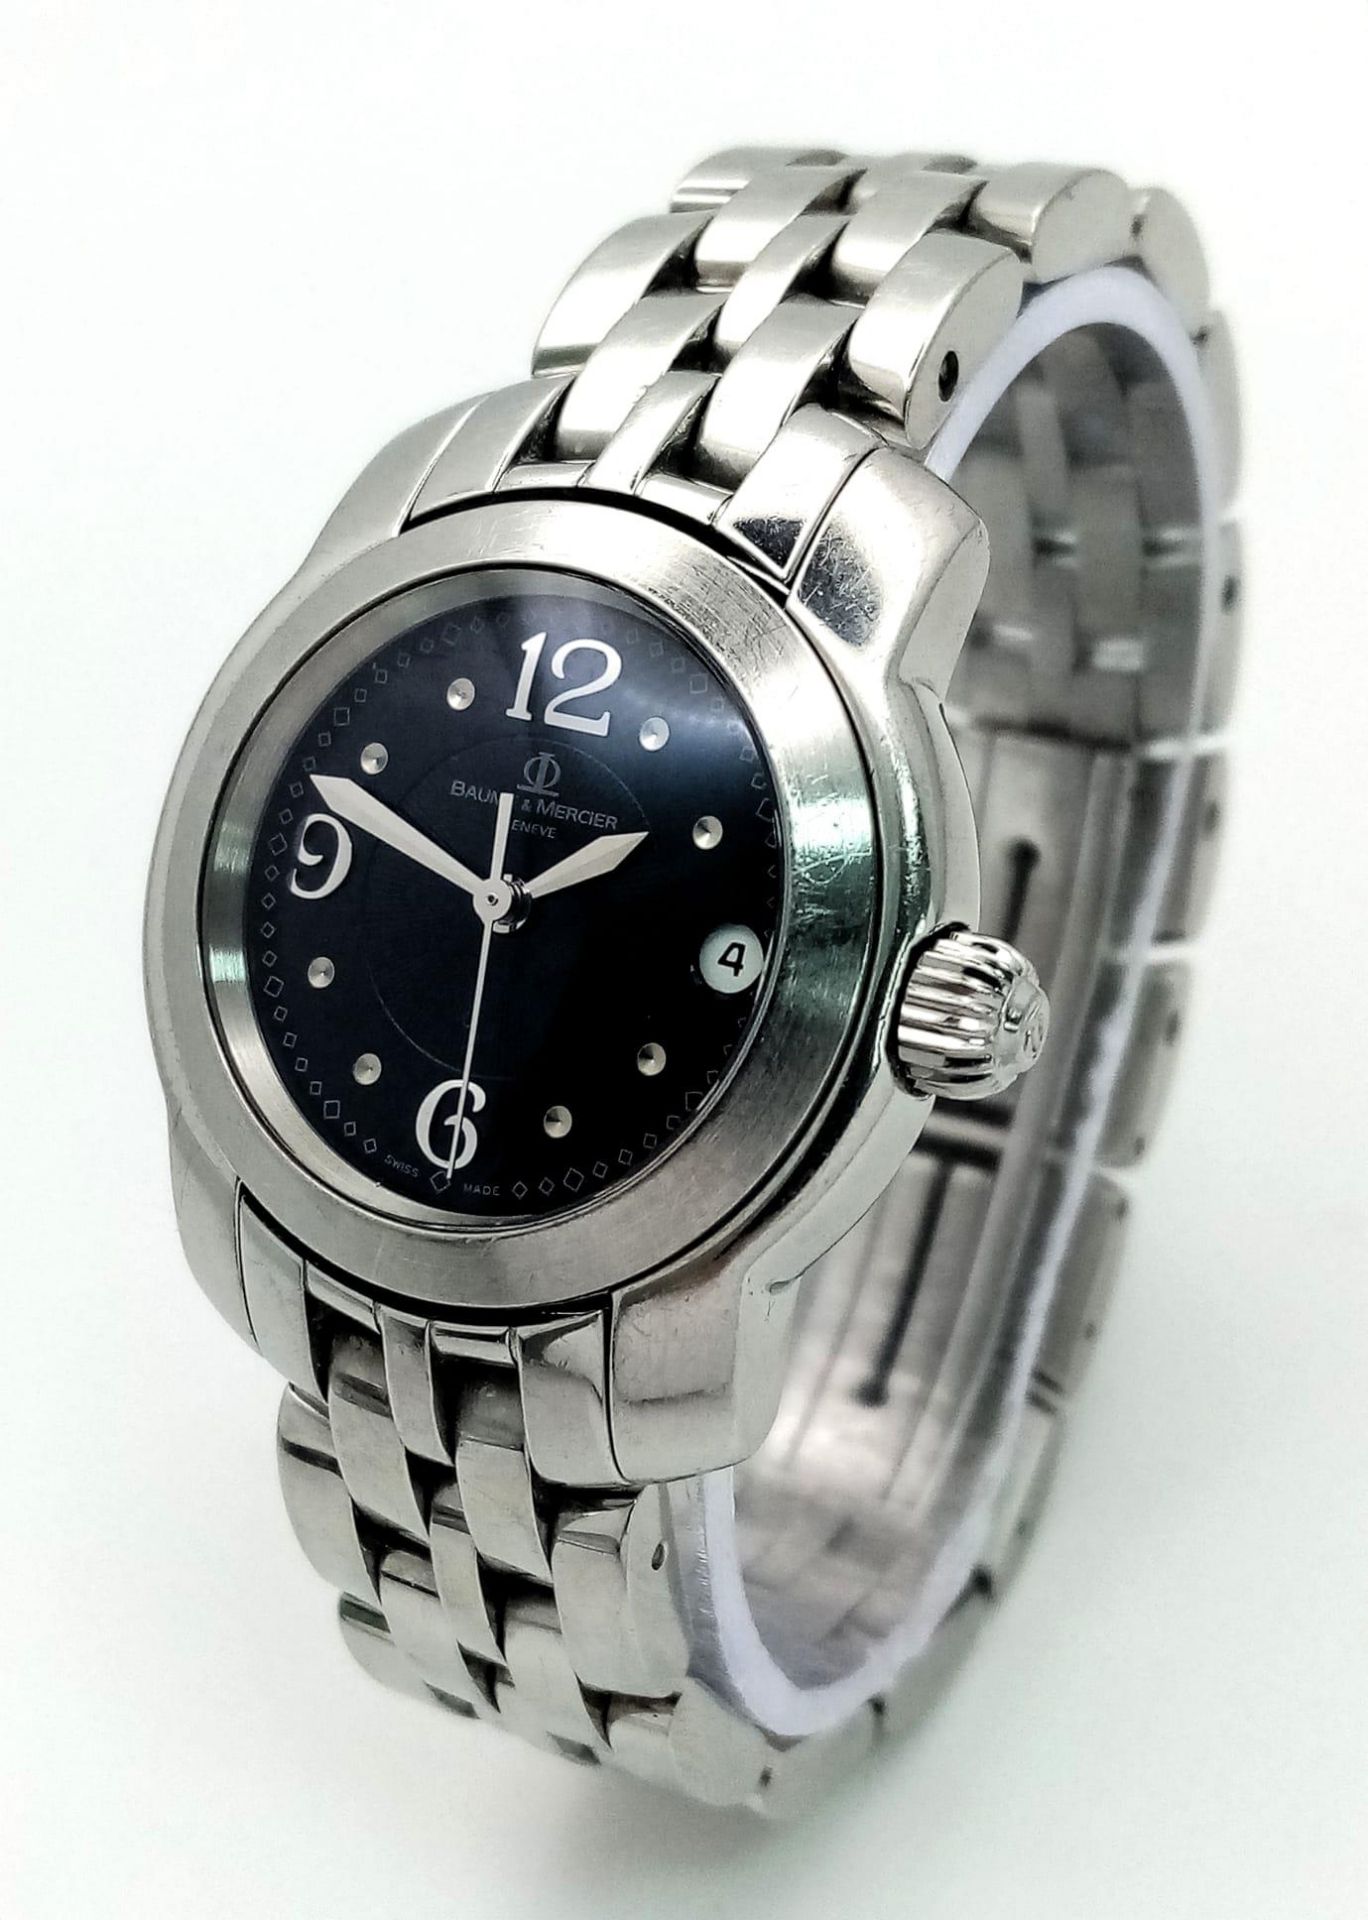 A BAUME AND MERCIER LADIES STAINLESS STEEL WRIST WATCH WITH BLACK DIAL , DATE BOX , AUTOMATIC